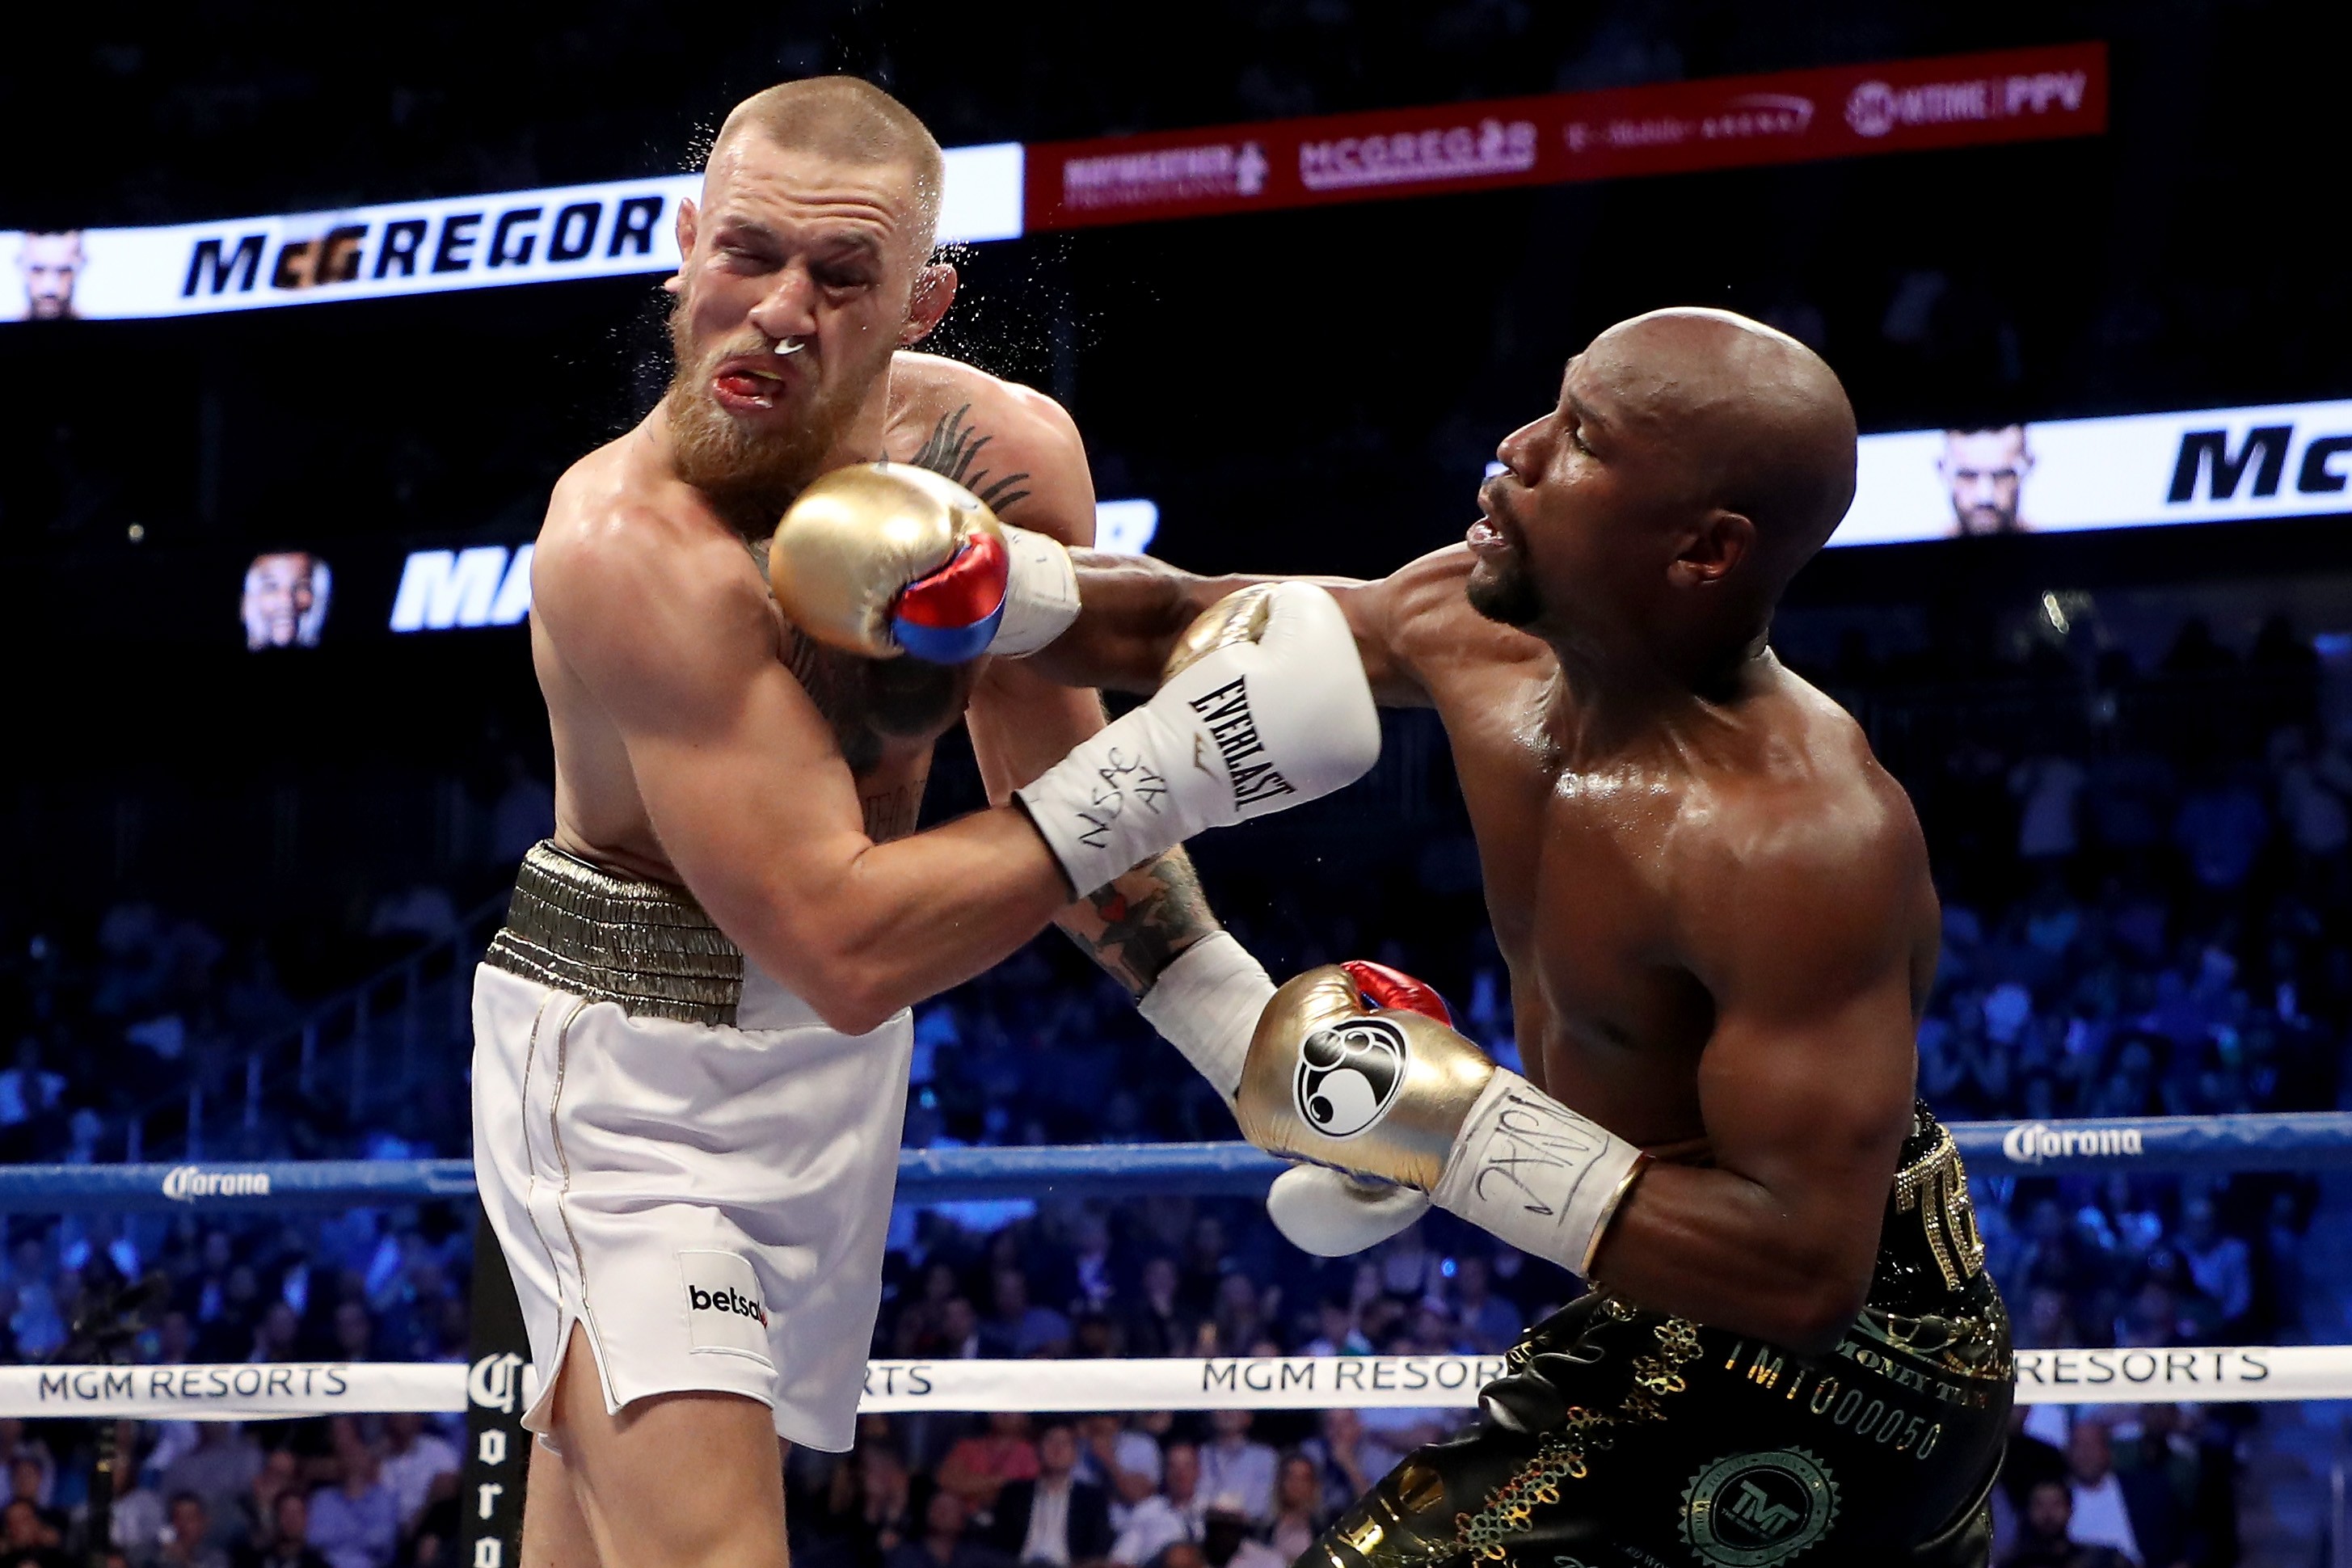 Floyd Mayweather Jnr beat Conor McGregor via 10th-round TKO in their much-hyped boxing bout. Photo: AFP